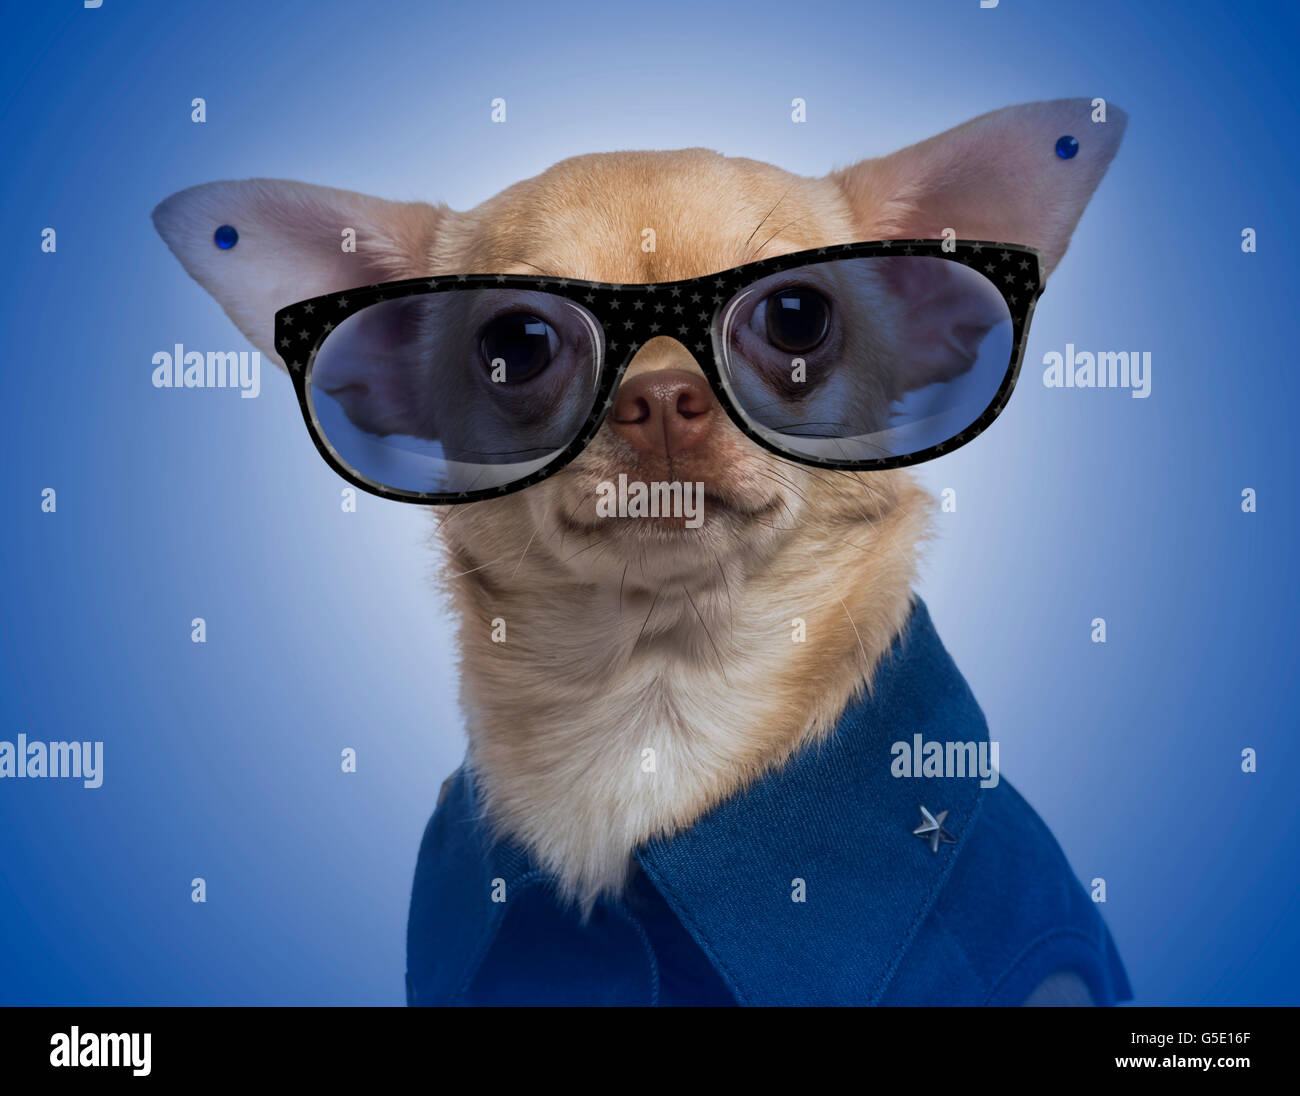 Dressed-up Chihuahua with earrings and wearing glasses on a blue gradient background Stock Photo